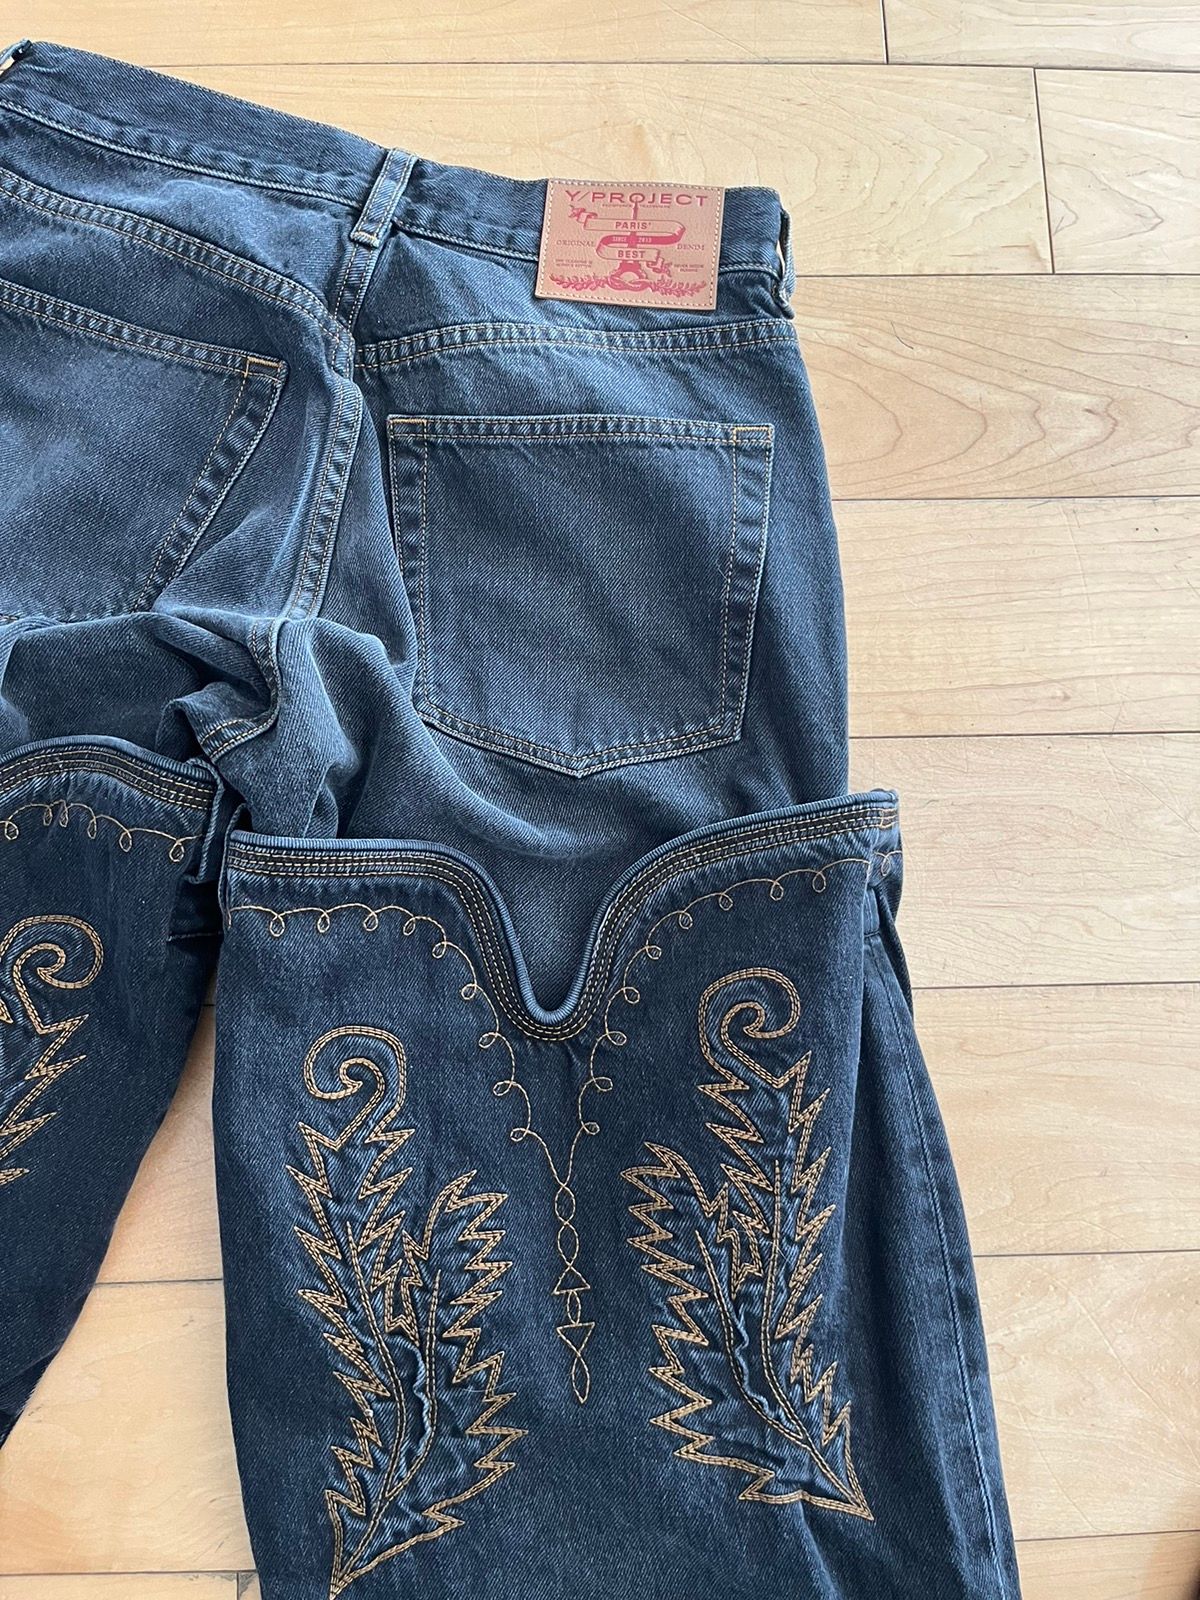 NWT - Y/PROJECT High Cowboy Jeans - 10